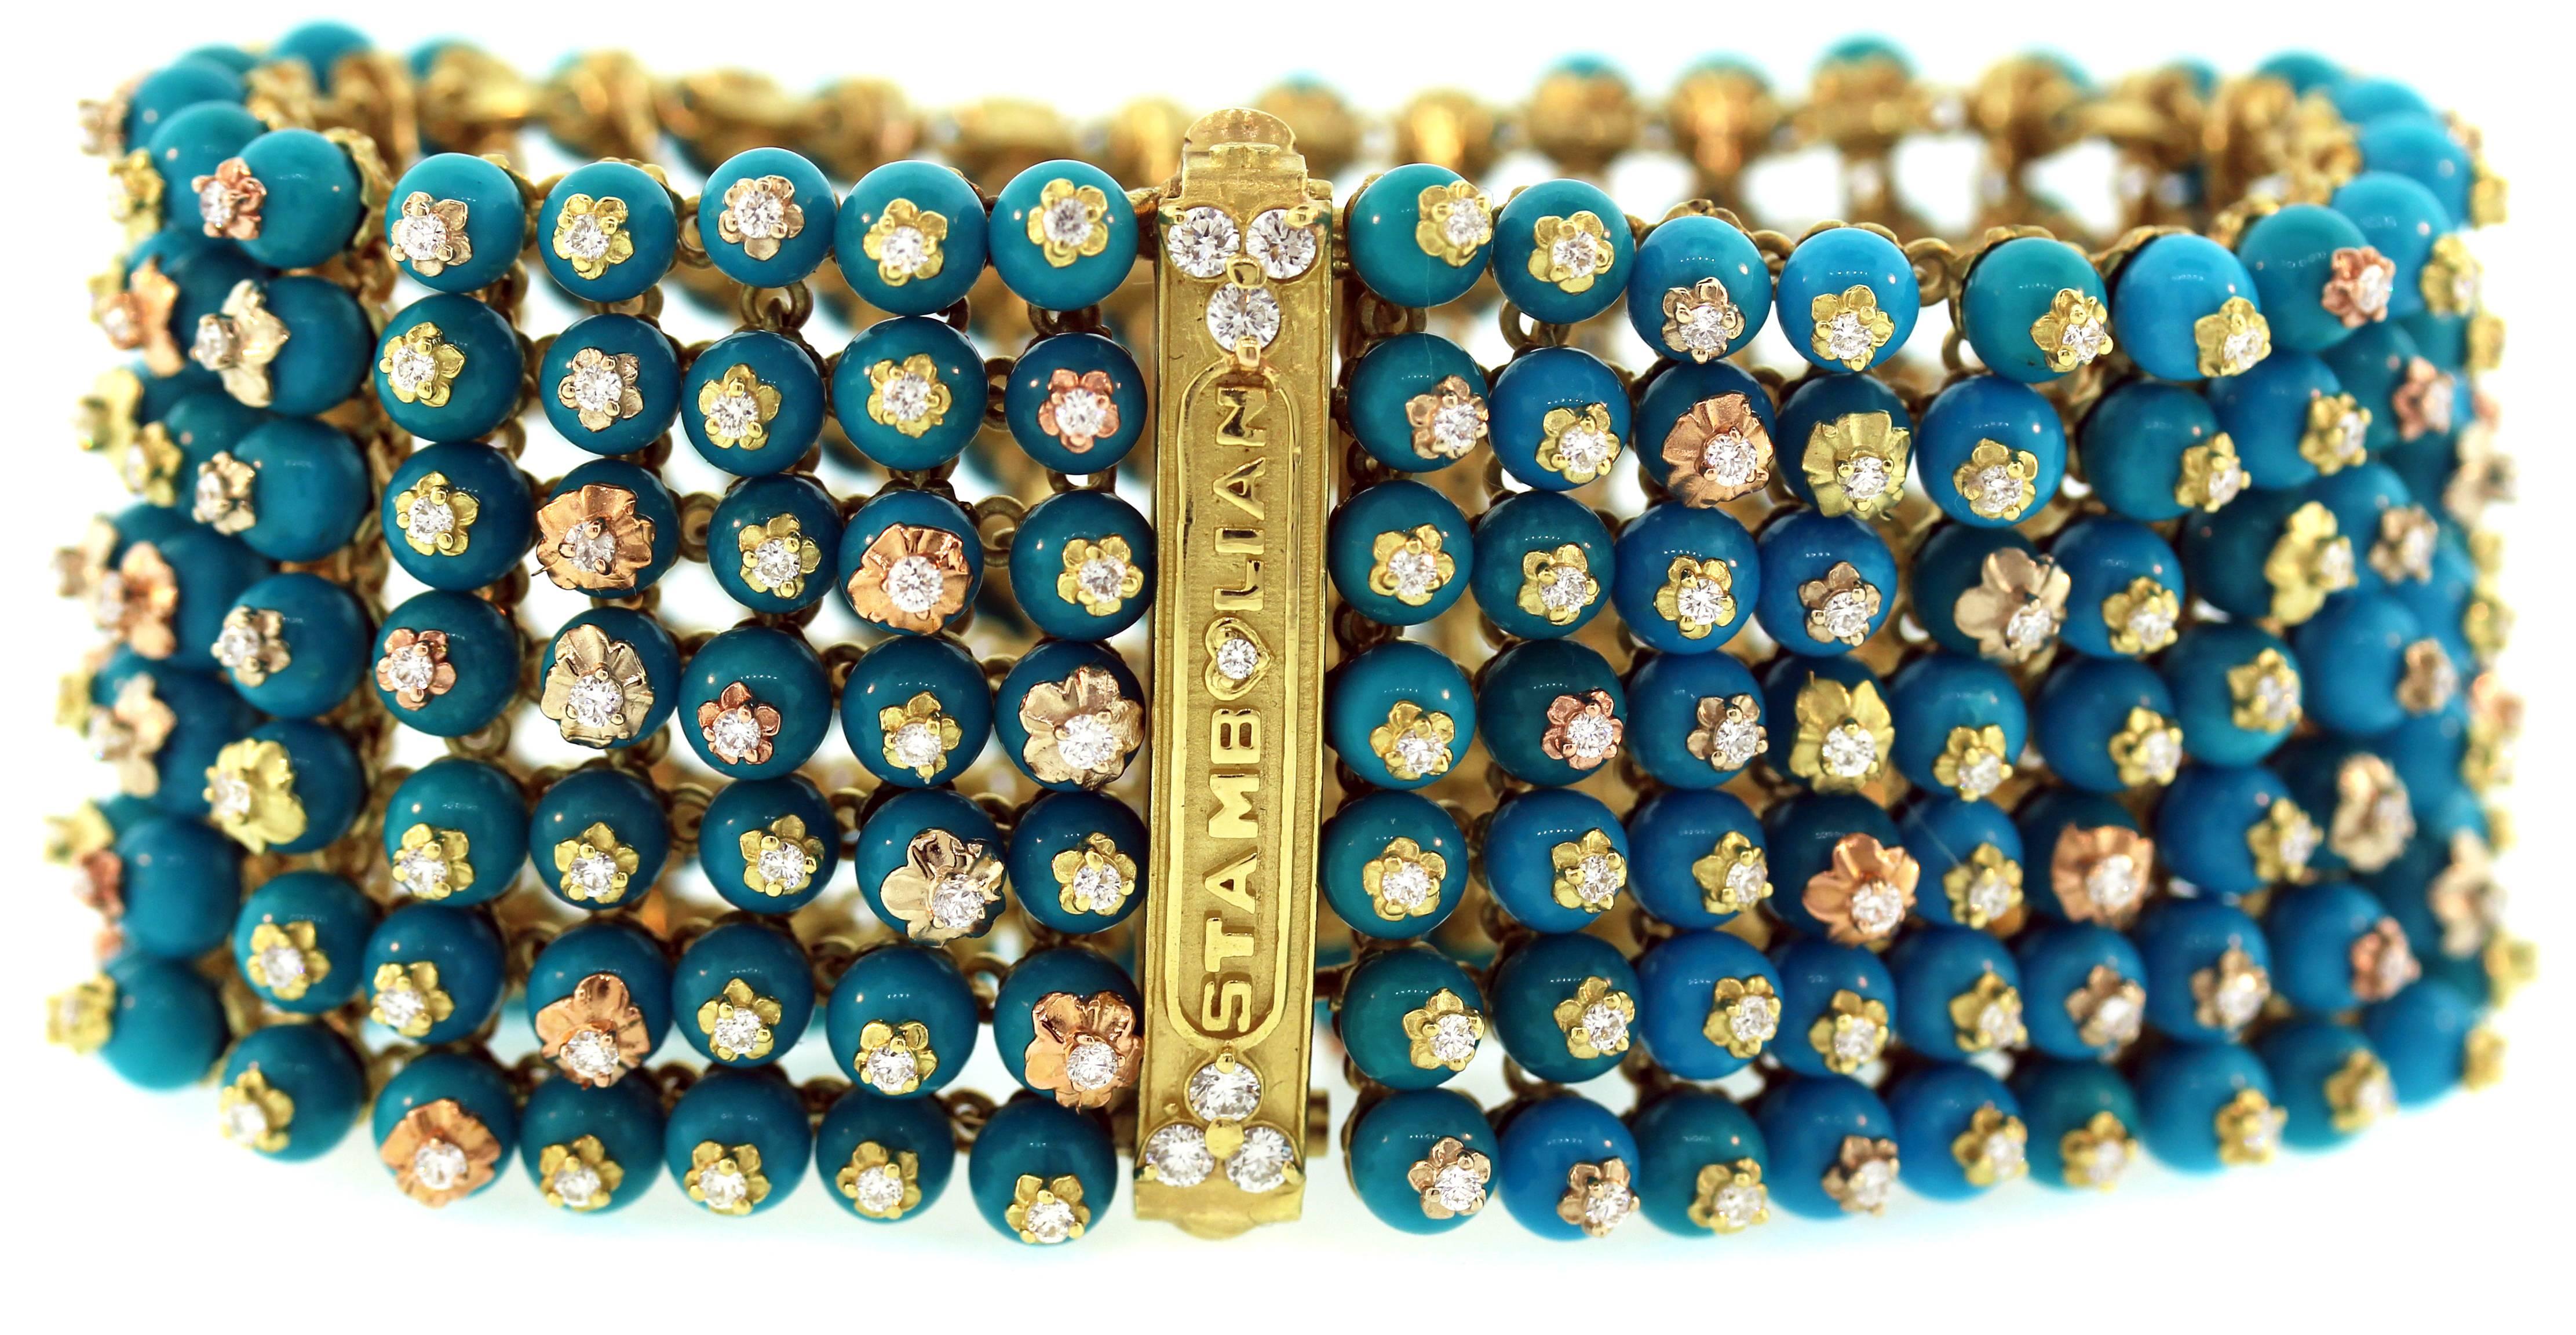 Stambolian 18K Gold Bracelet with Sleeping Beauty Turquoise and Diamonds

205 carats of AAA Quality Sleeping Beauty Turquoise cover this entire bracelet with Tri-Color Gold and Diamond Flowers set ontop each stone.

3.89ct. G Color, VS Clarity